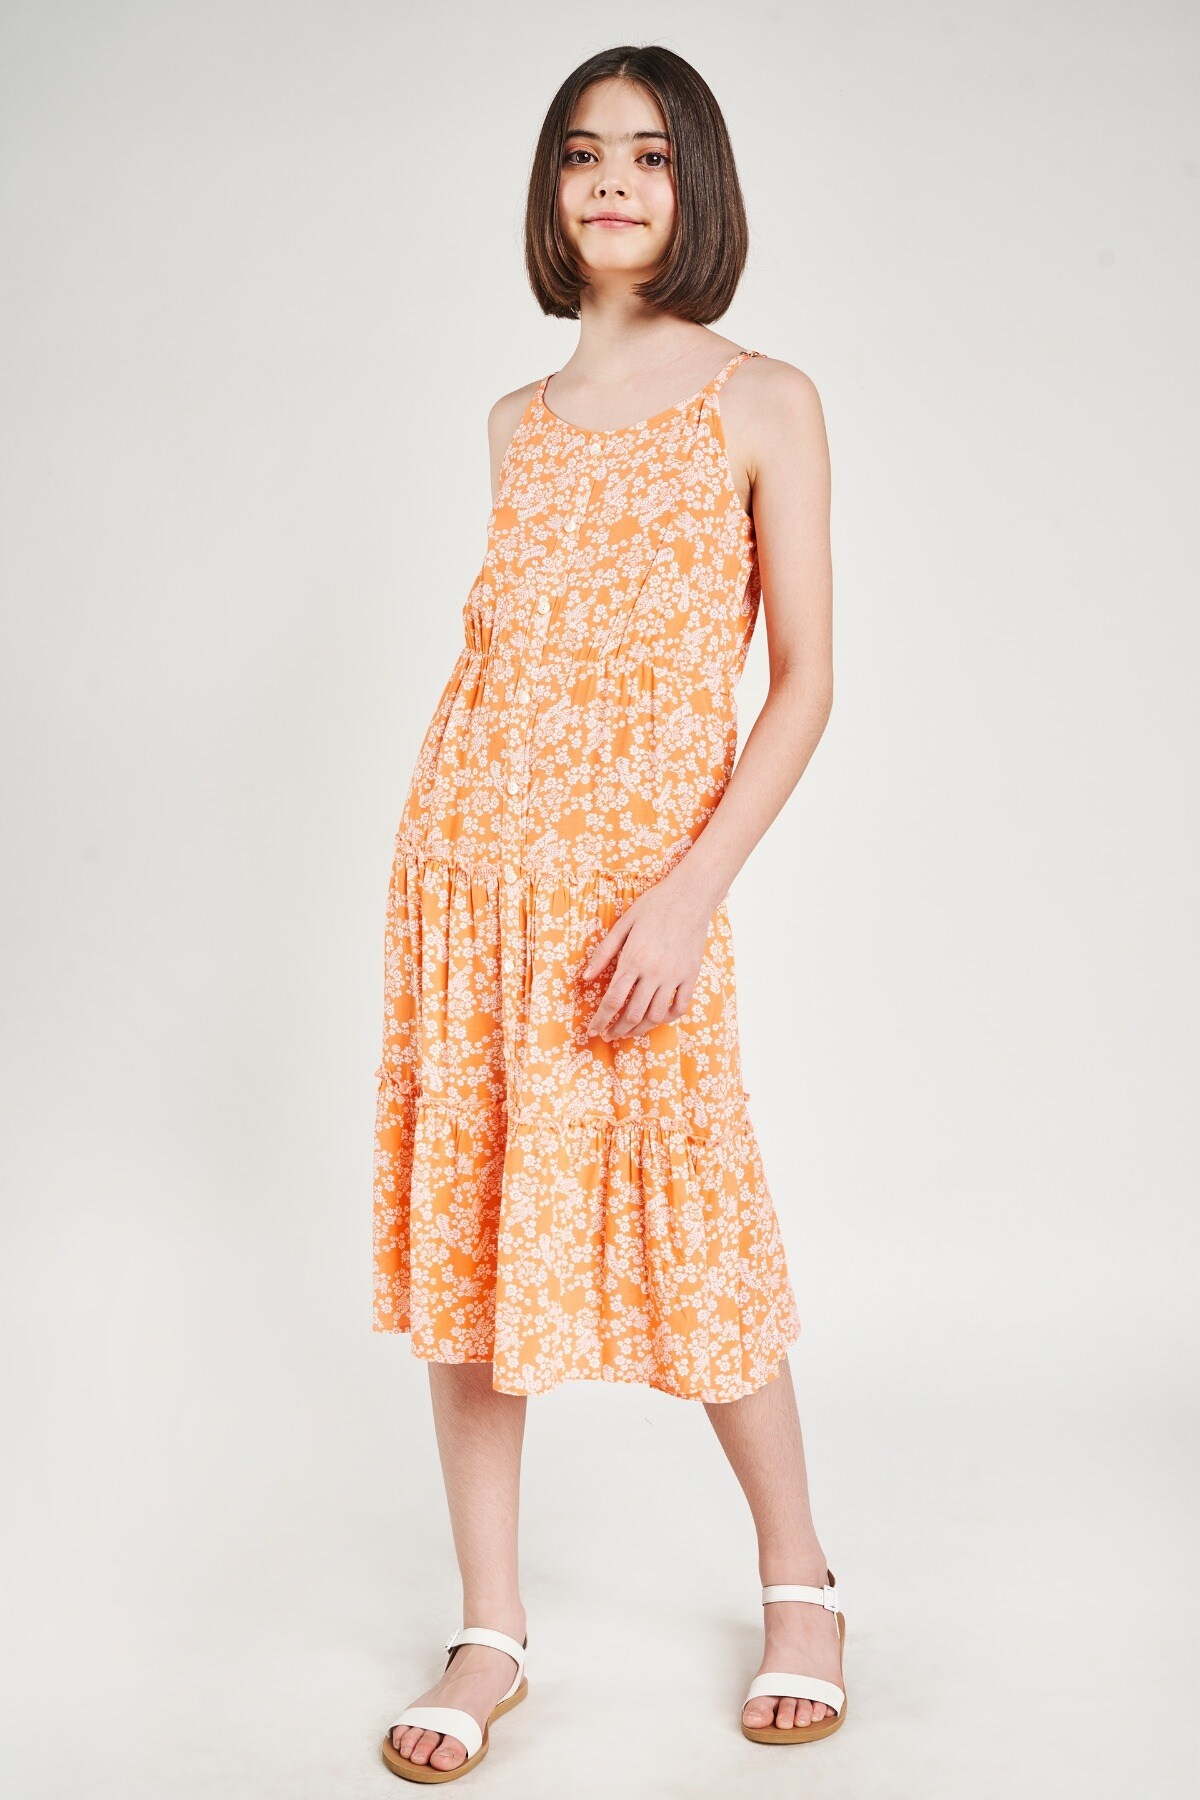 AND | Orange Floral Printed Fit And Flare Dress 1